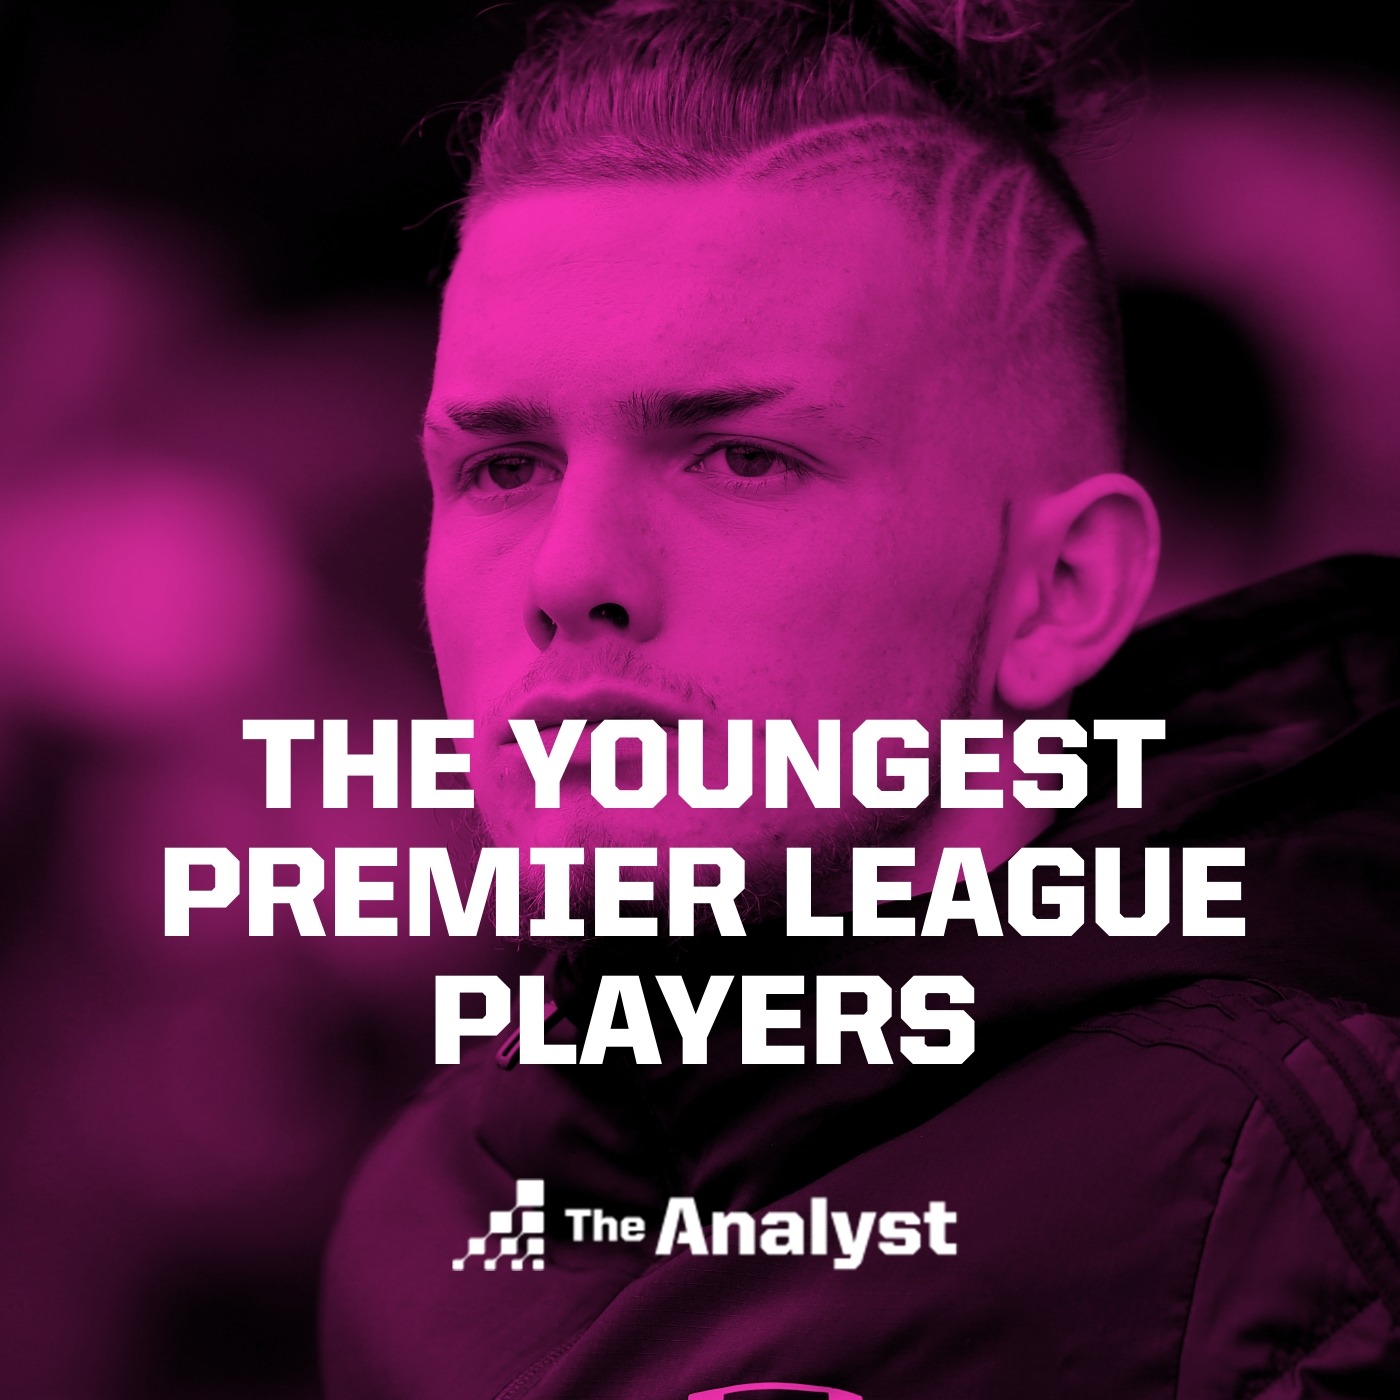 The Youngest Premier League Players